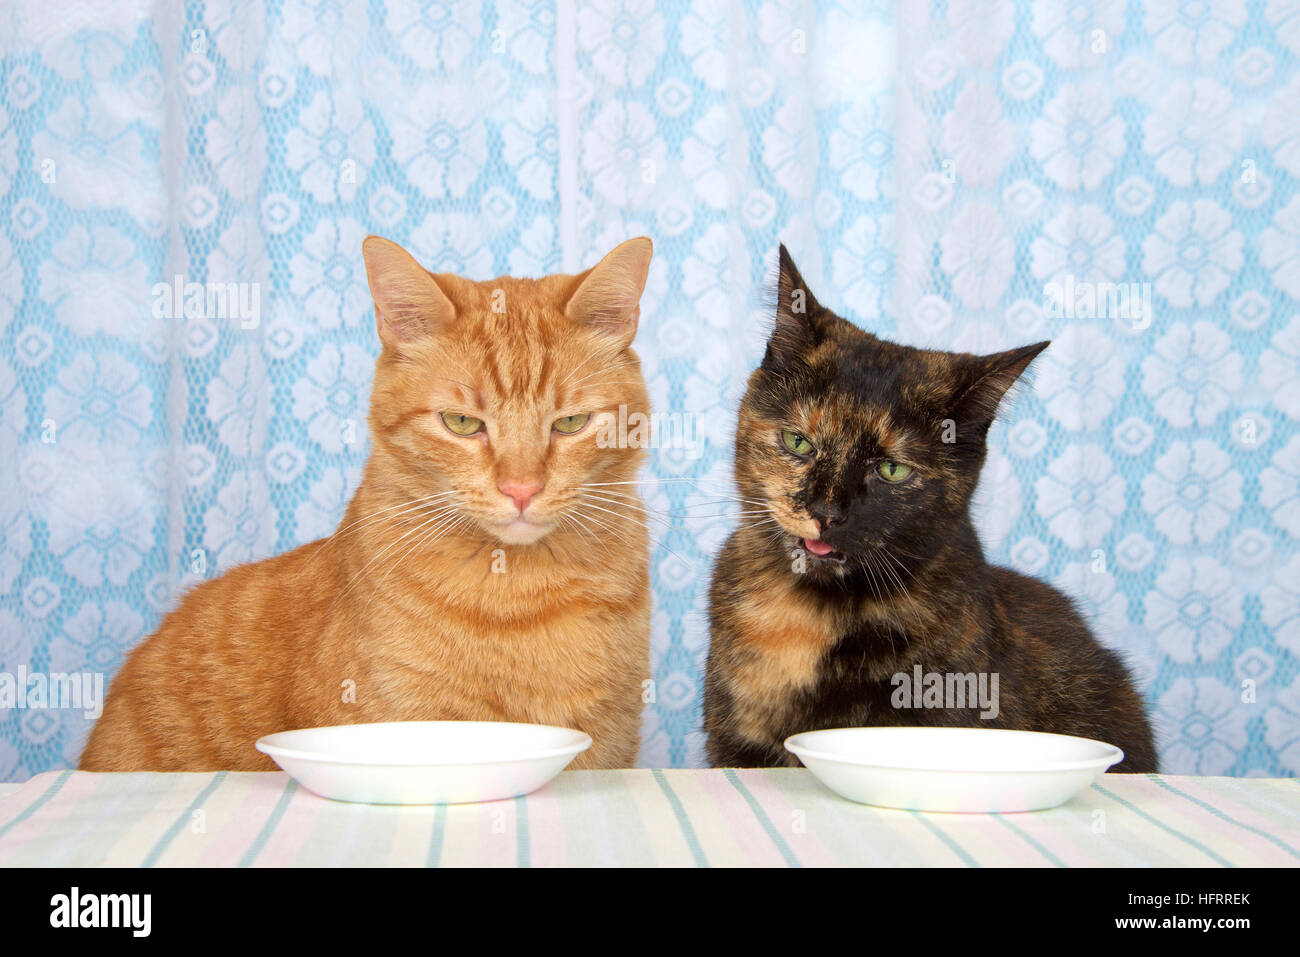 Young orange tabby cat sitting  next to black and orange torbie tortie tabby cat at kitchen counter with white plates in front waiting for food expect Stock Photo